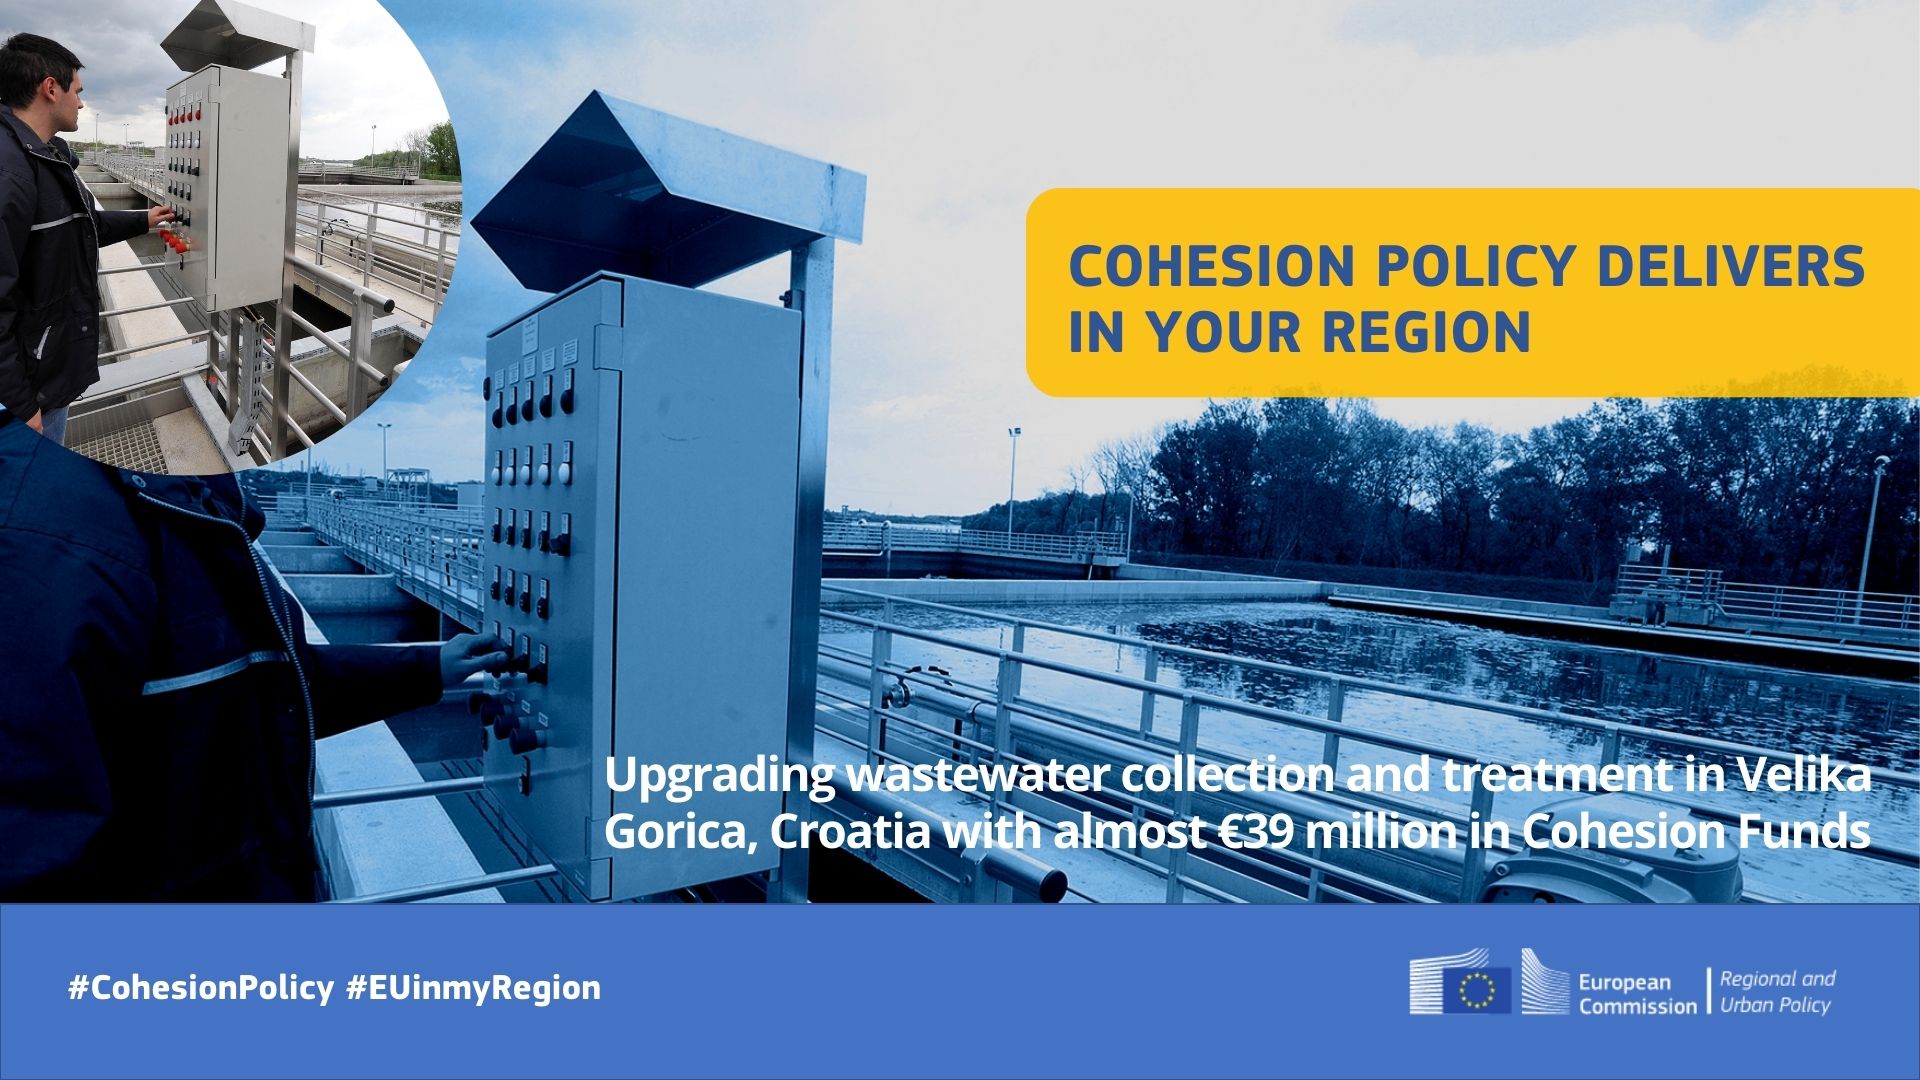 Almost €39 million in Cohesion Funds to upgrade wastewater treatment in Velika Gorica, Croatia